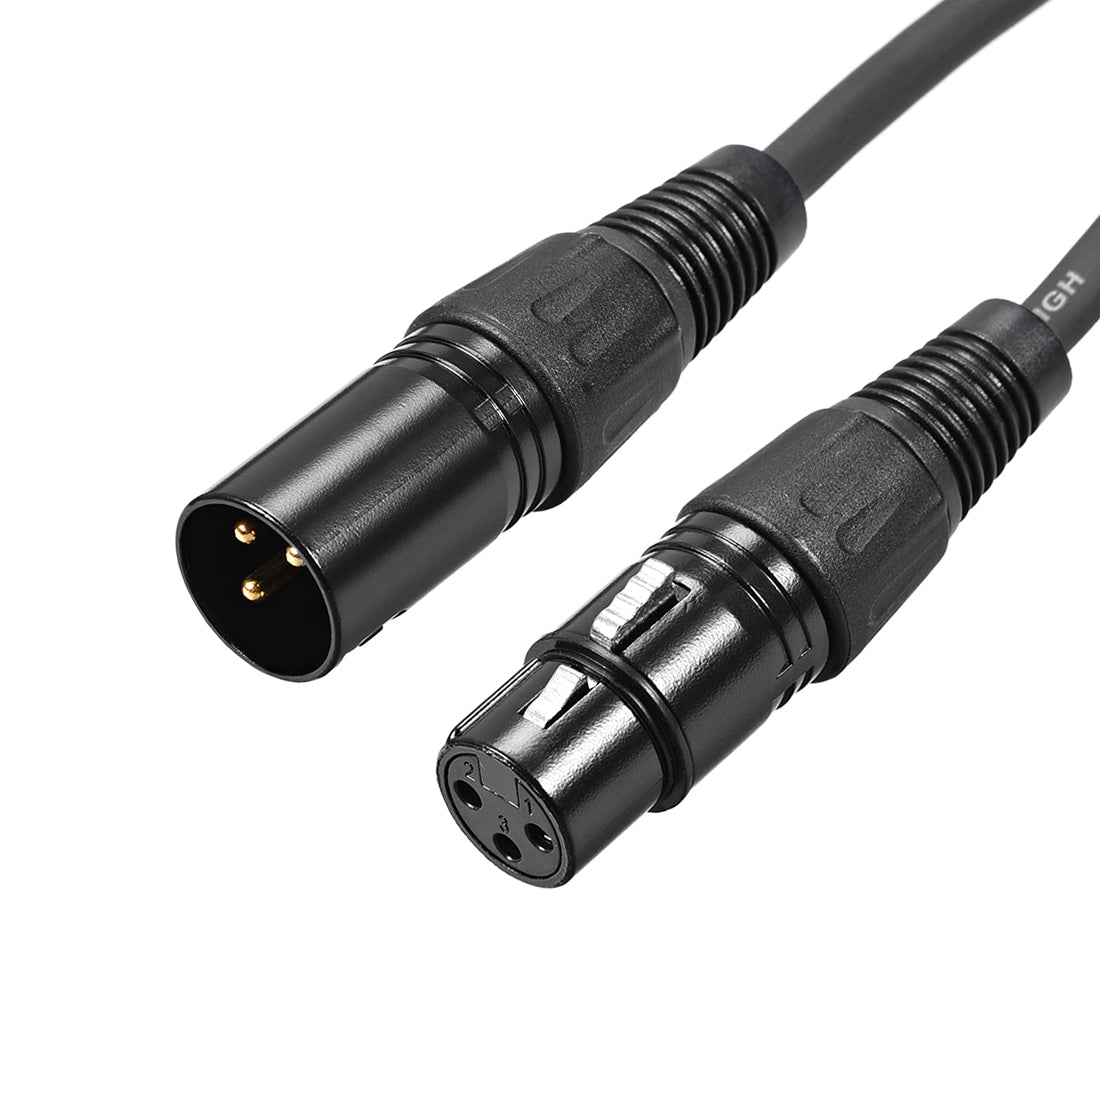 uxcell Uxcell XLR Male to XLR Female Cable Line for Videos Cameras Sound Card Mixer Black XLR Black Line 0.5M 1.64ft